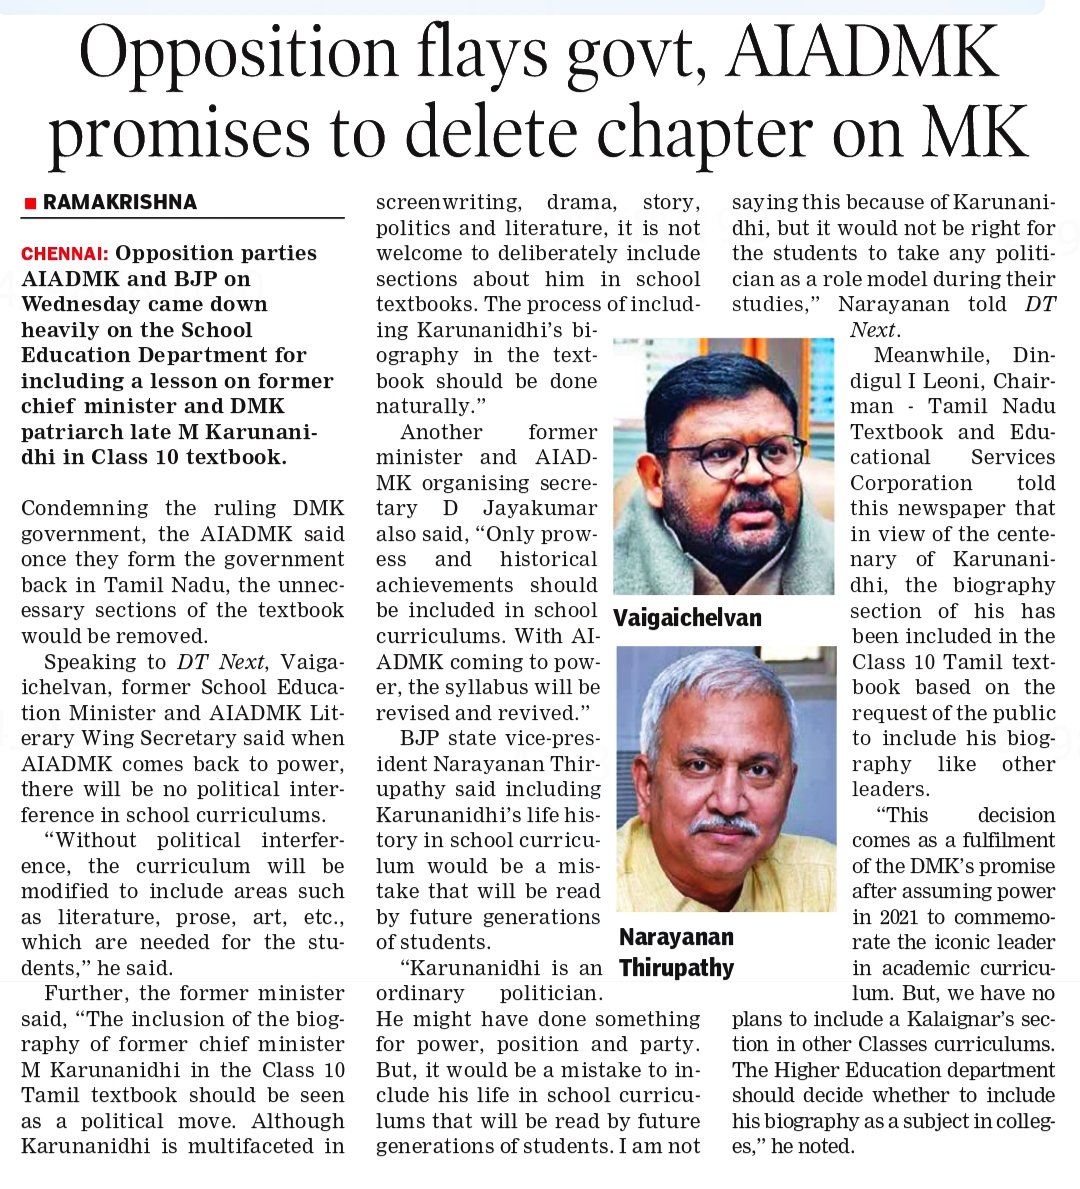 Opposition parties #AIADMK #BJP came down heavily on the #SchoolEducationdepartment for including a lesson on #Karunanidhi in class X textbook @dt_next dtnext.in/news/tamilnadu… #TamilNadu #DMK #Schoolbooks @narayanantbjp